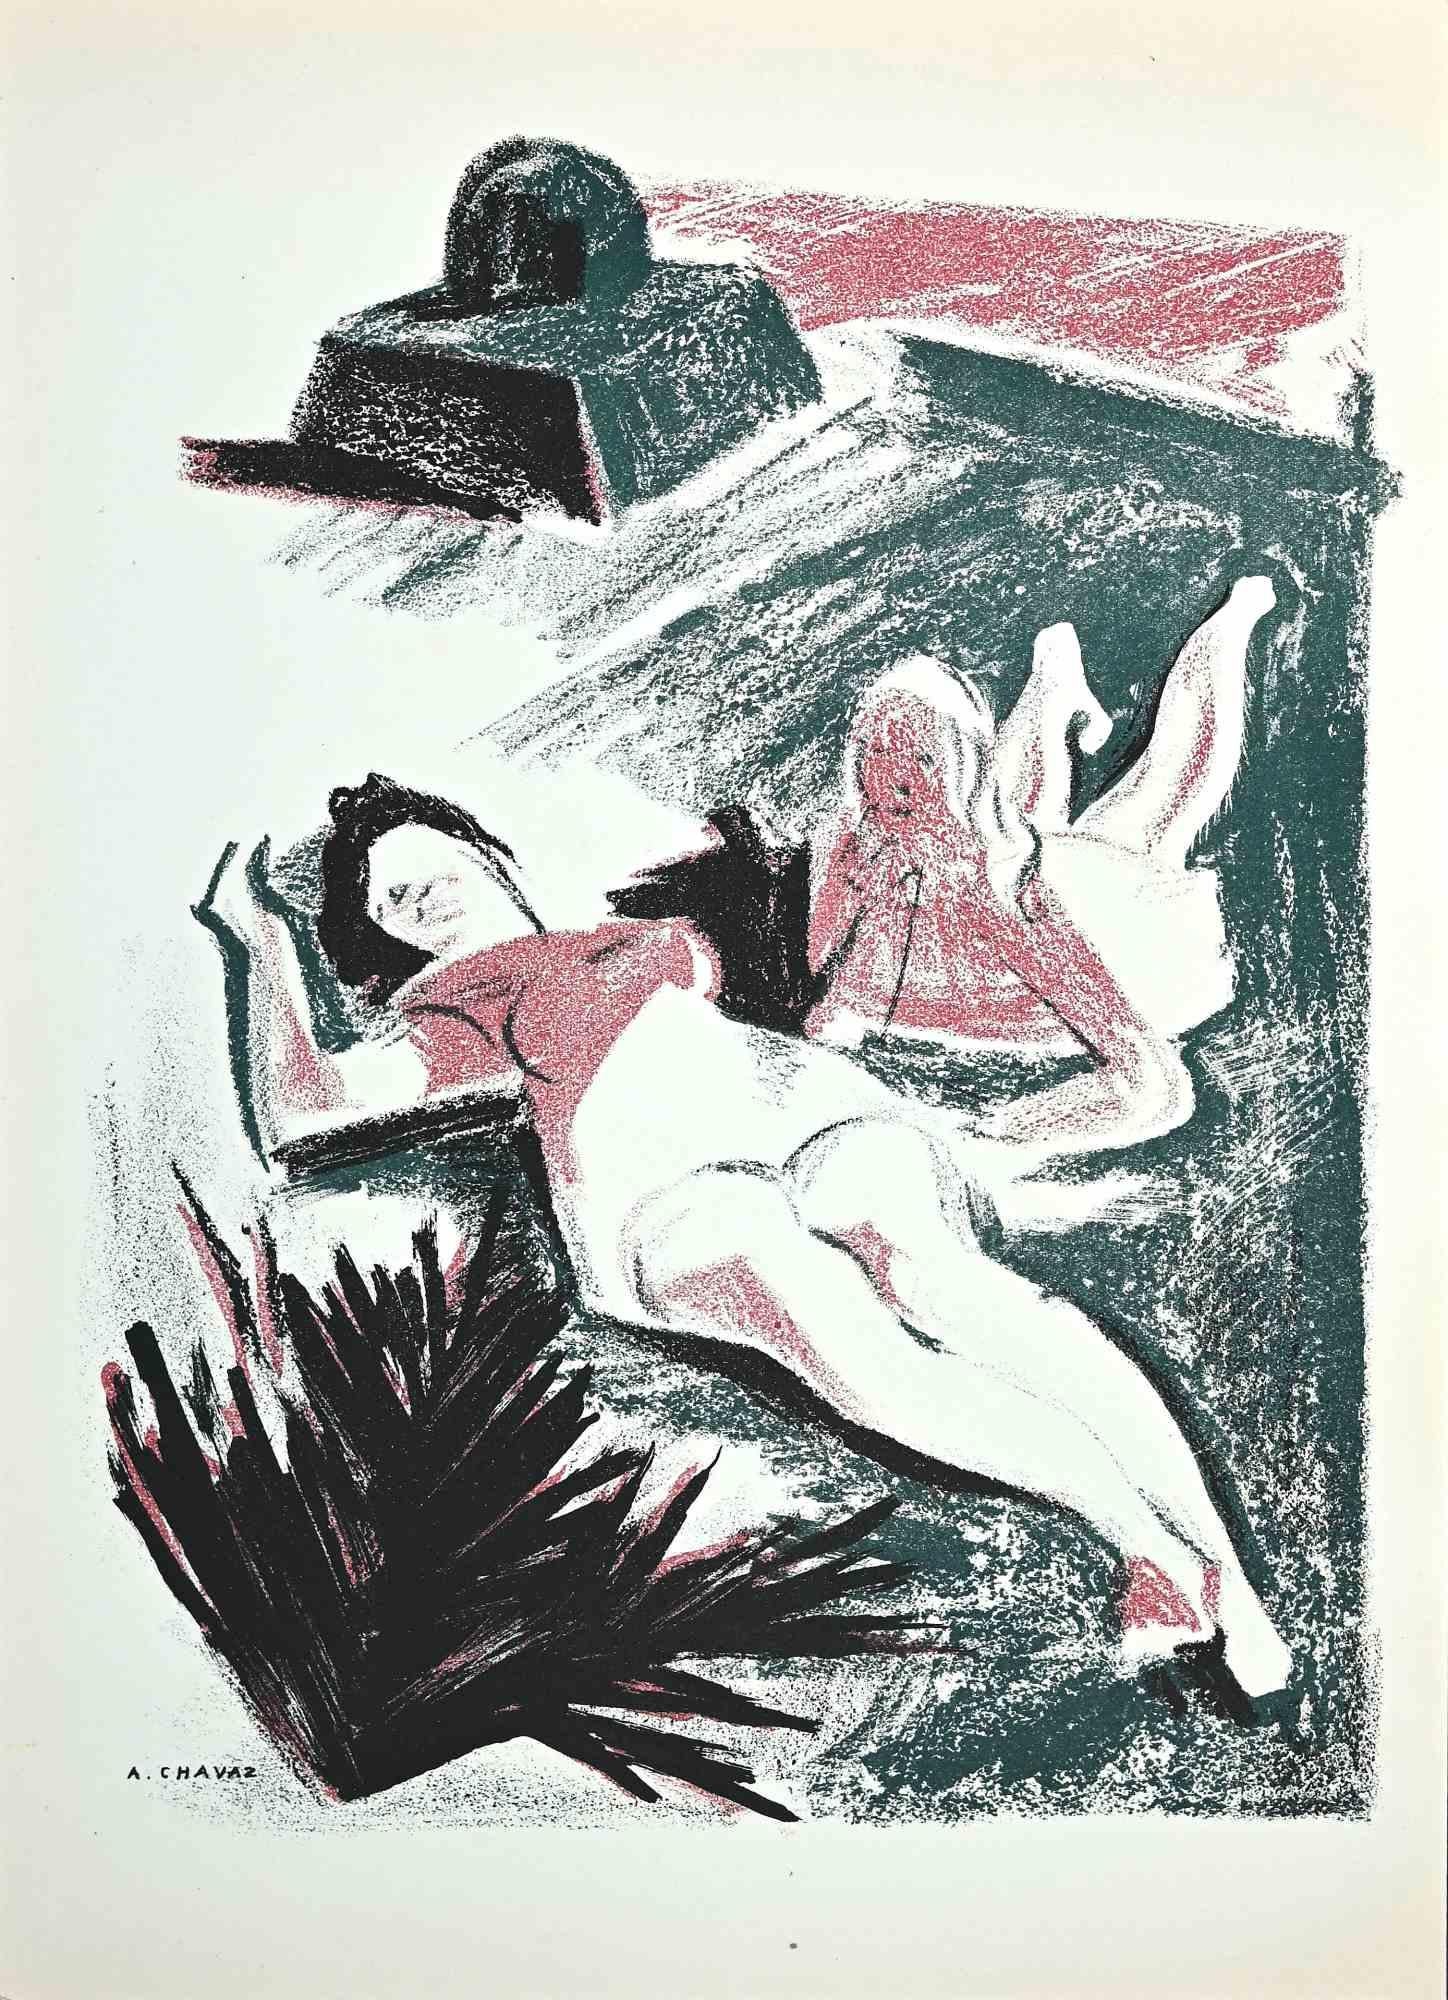 Women in the Sun is an original lithograph on paper realized by Albert Chavaz in 1947.

Good Conditions.

The artwork is depicted through harmonious colors in a well-balanced composition.